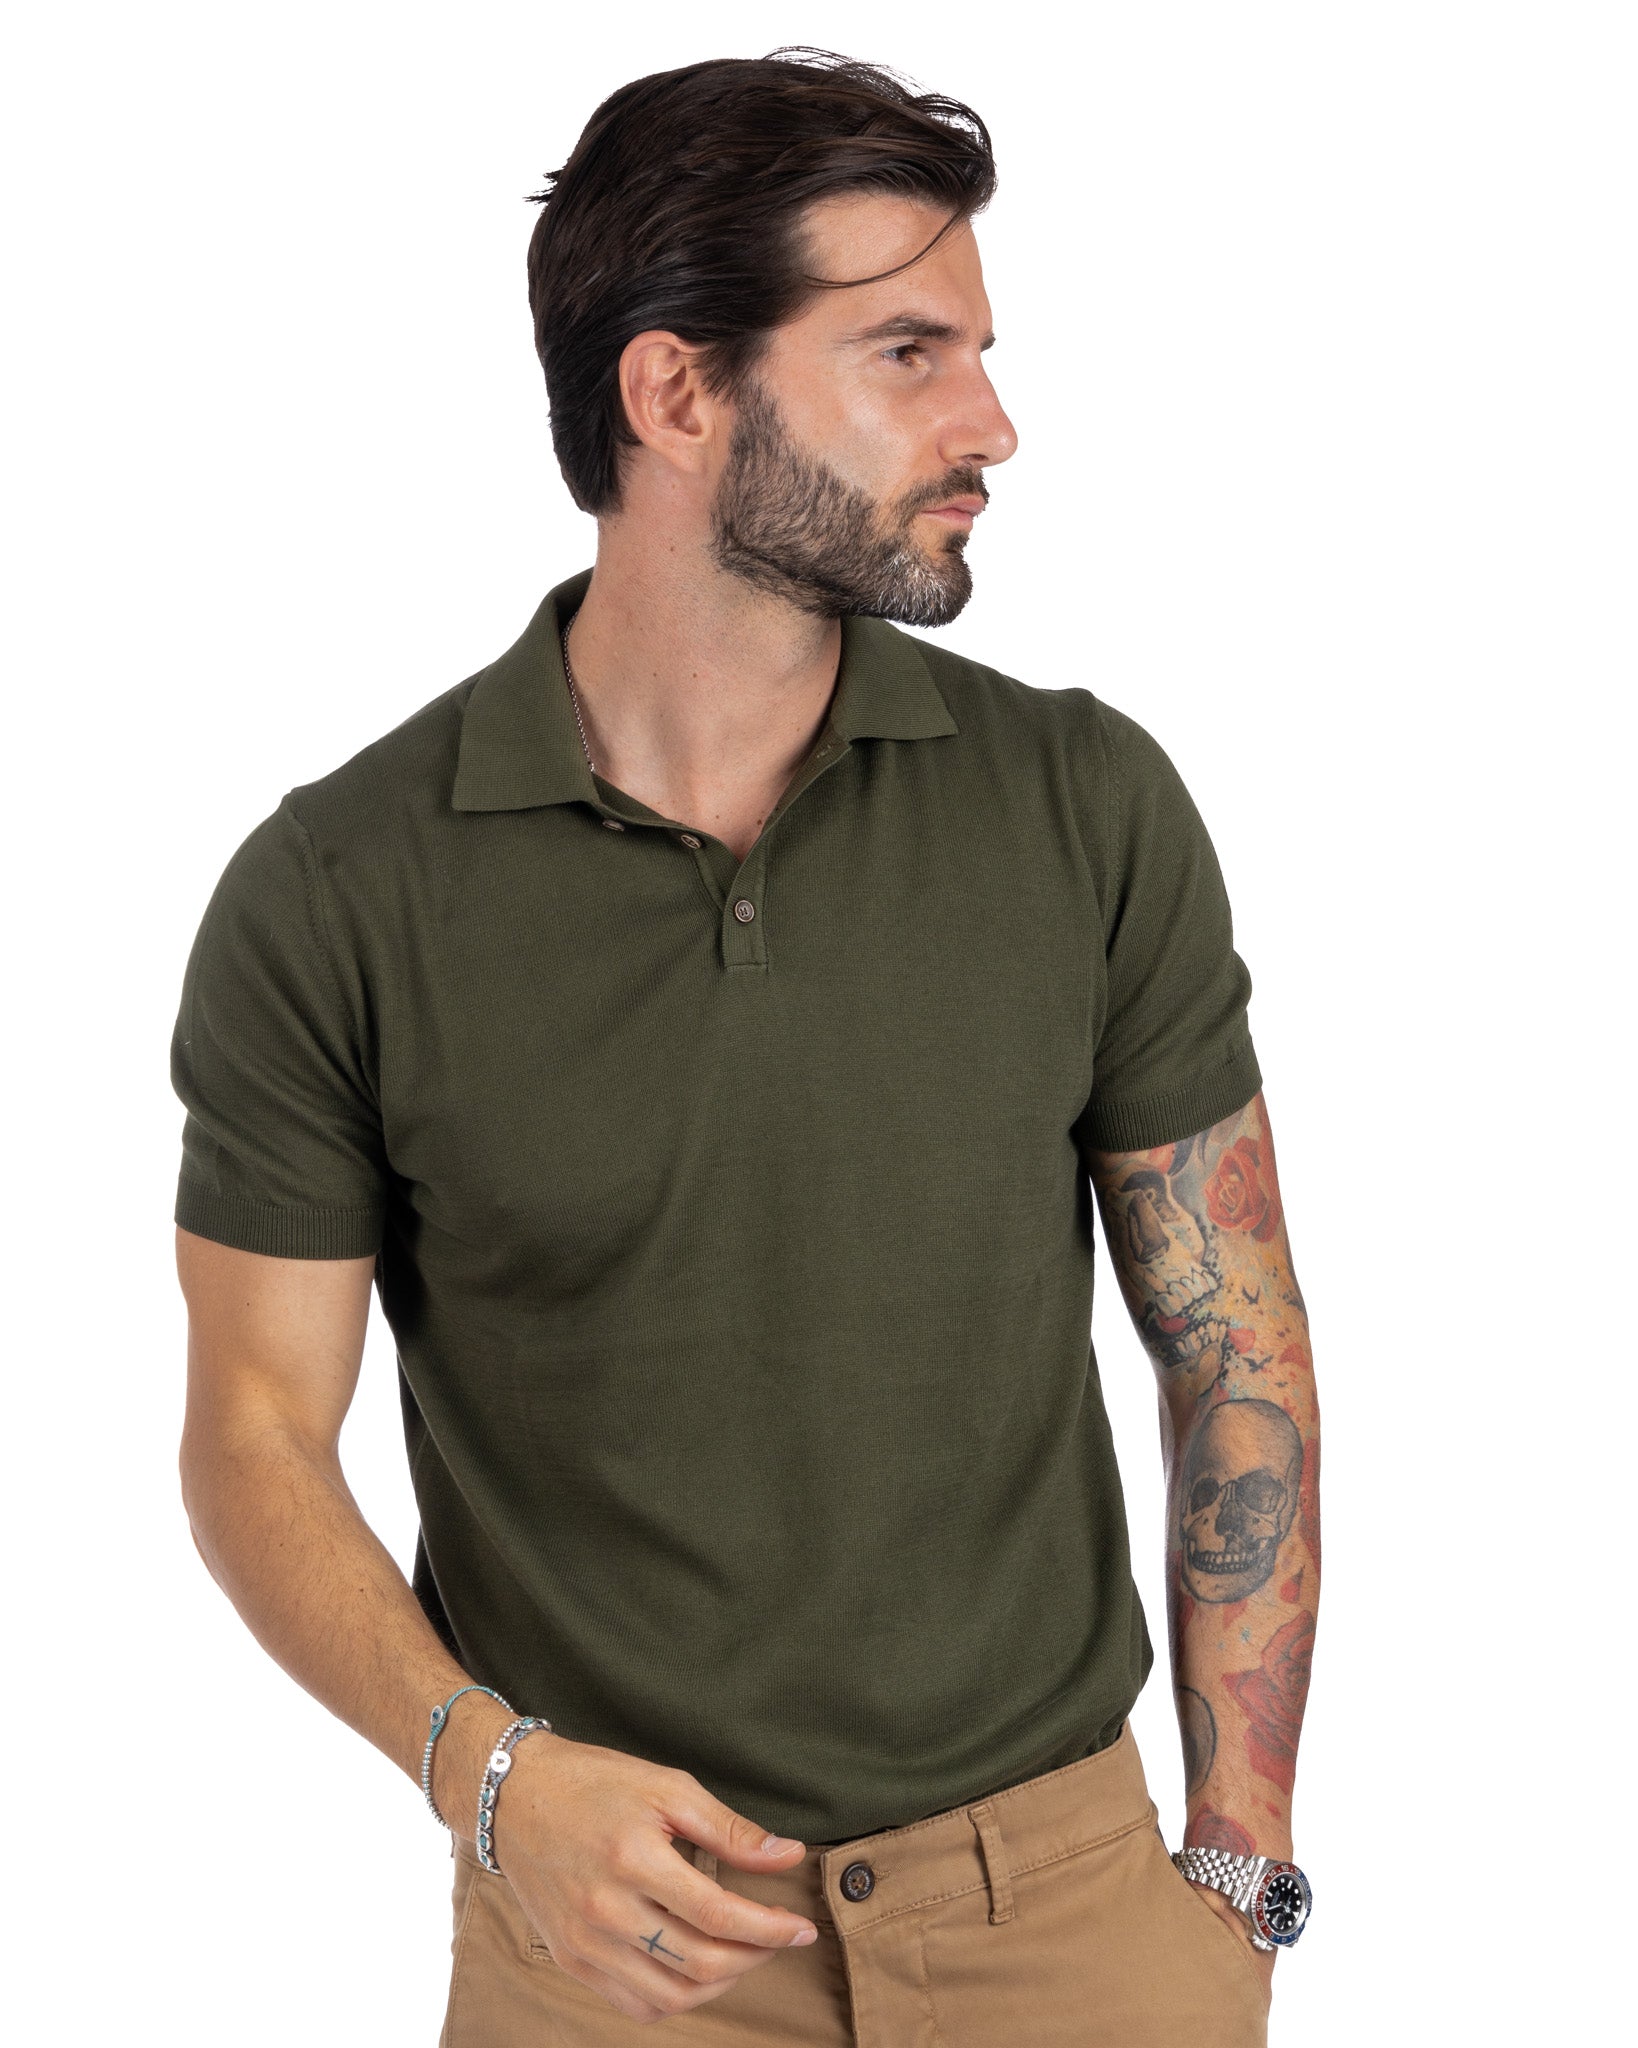 Roger - military knit polo